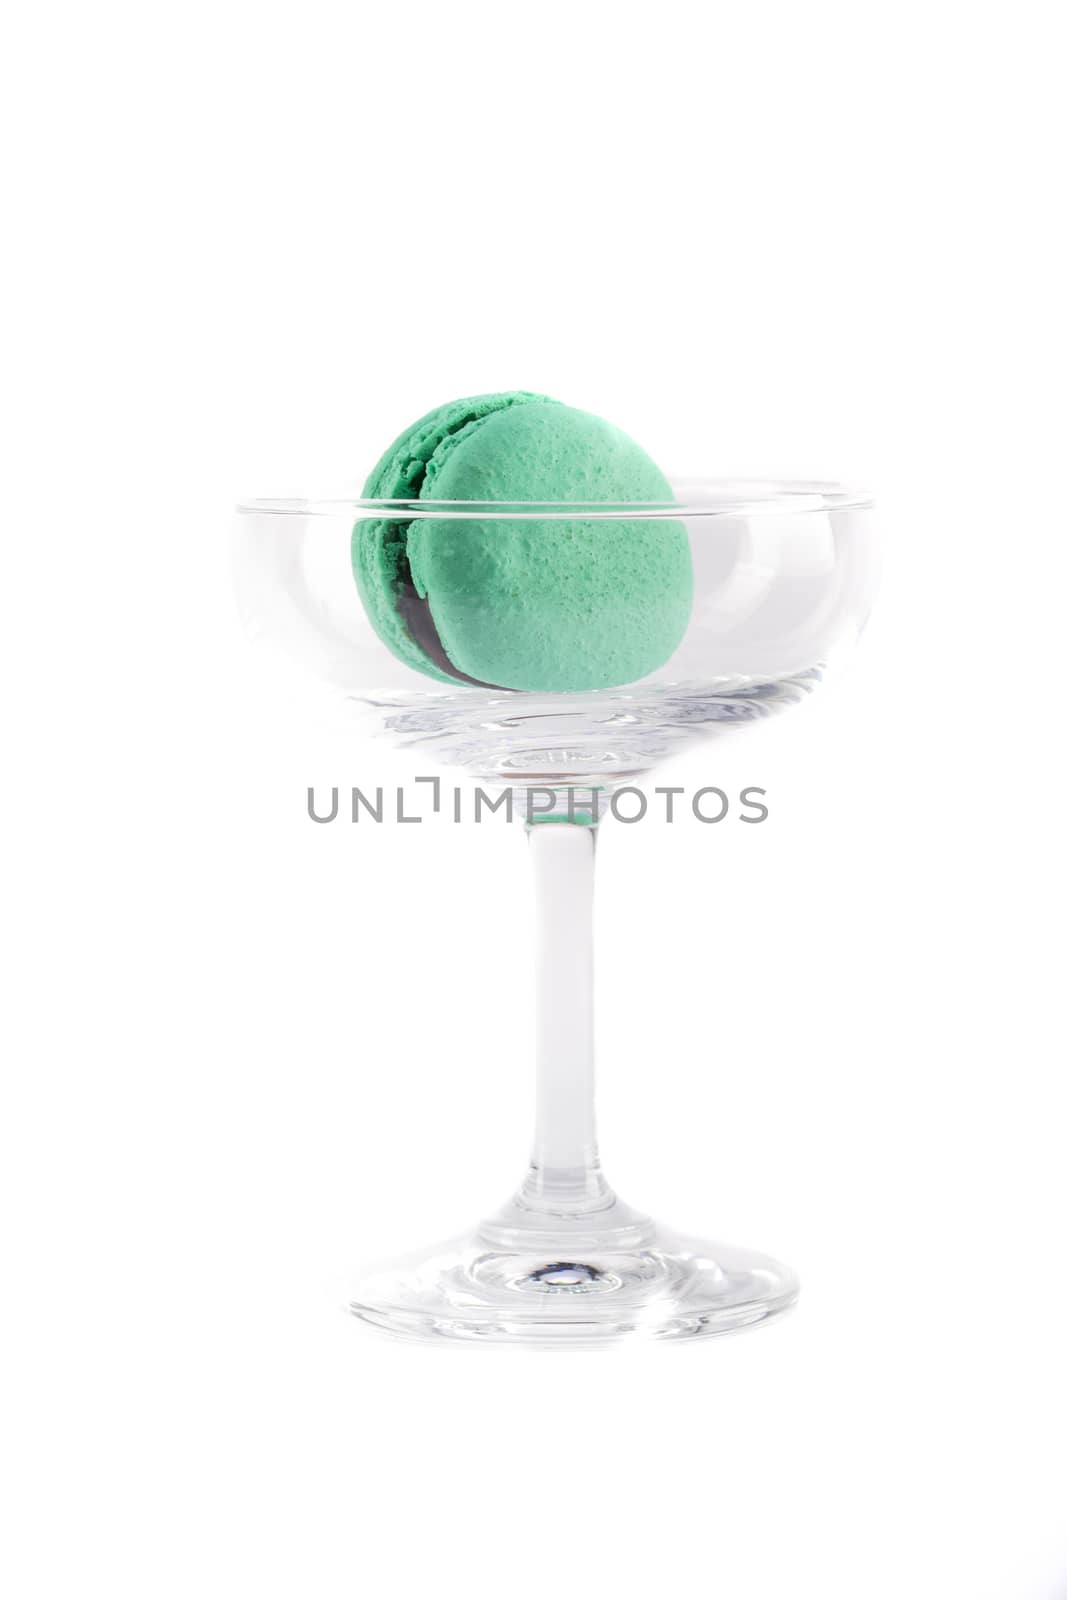 a mint flavored macaroon with chocolate filling in a clear glass, isolated on white background